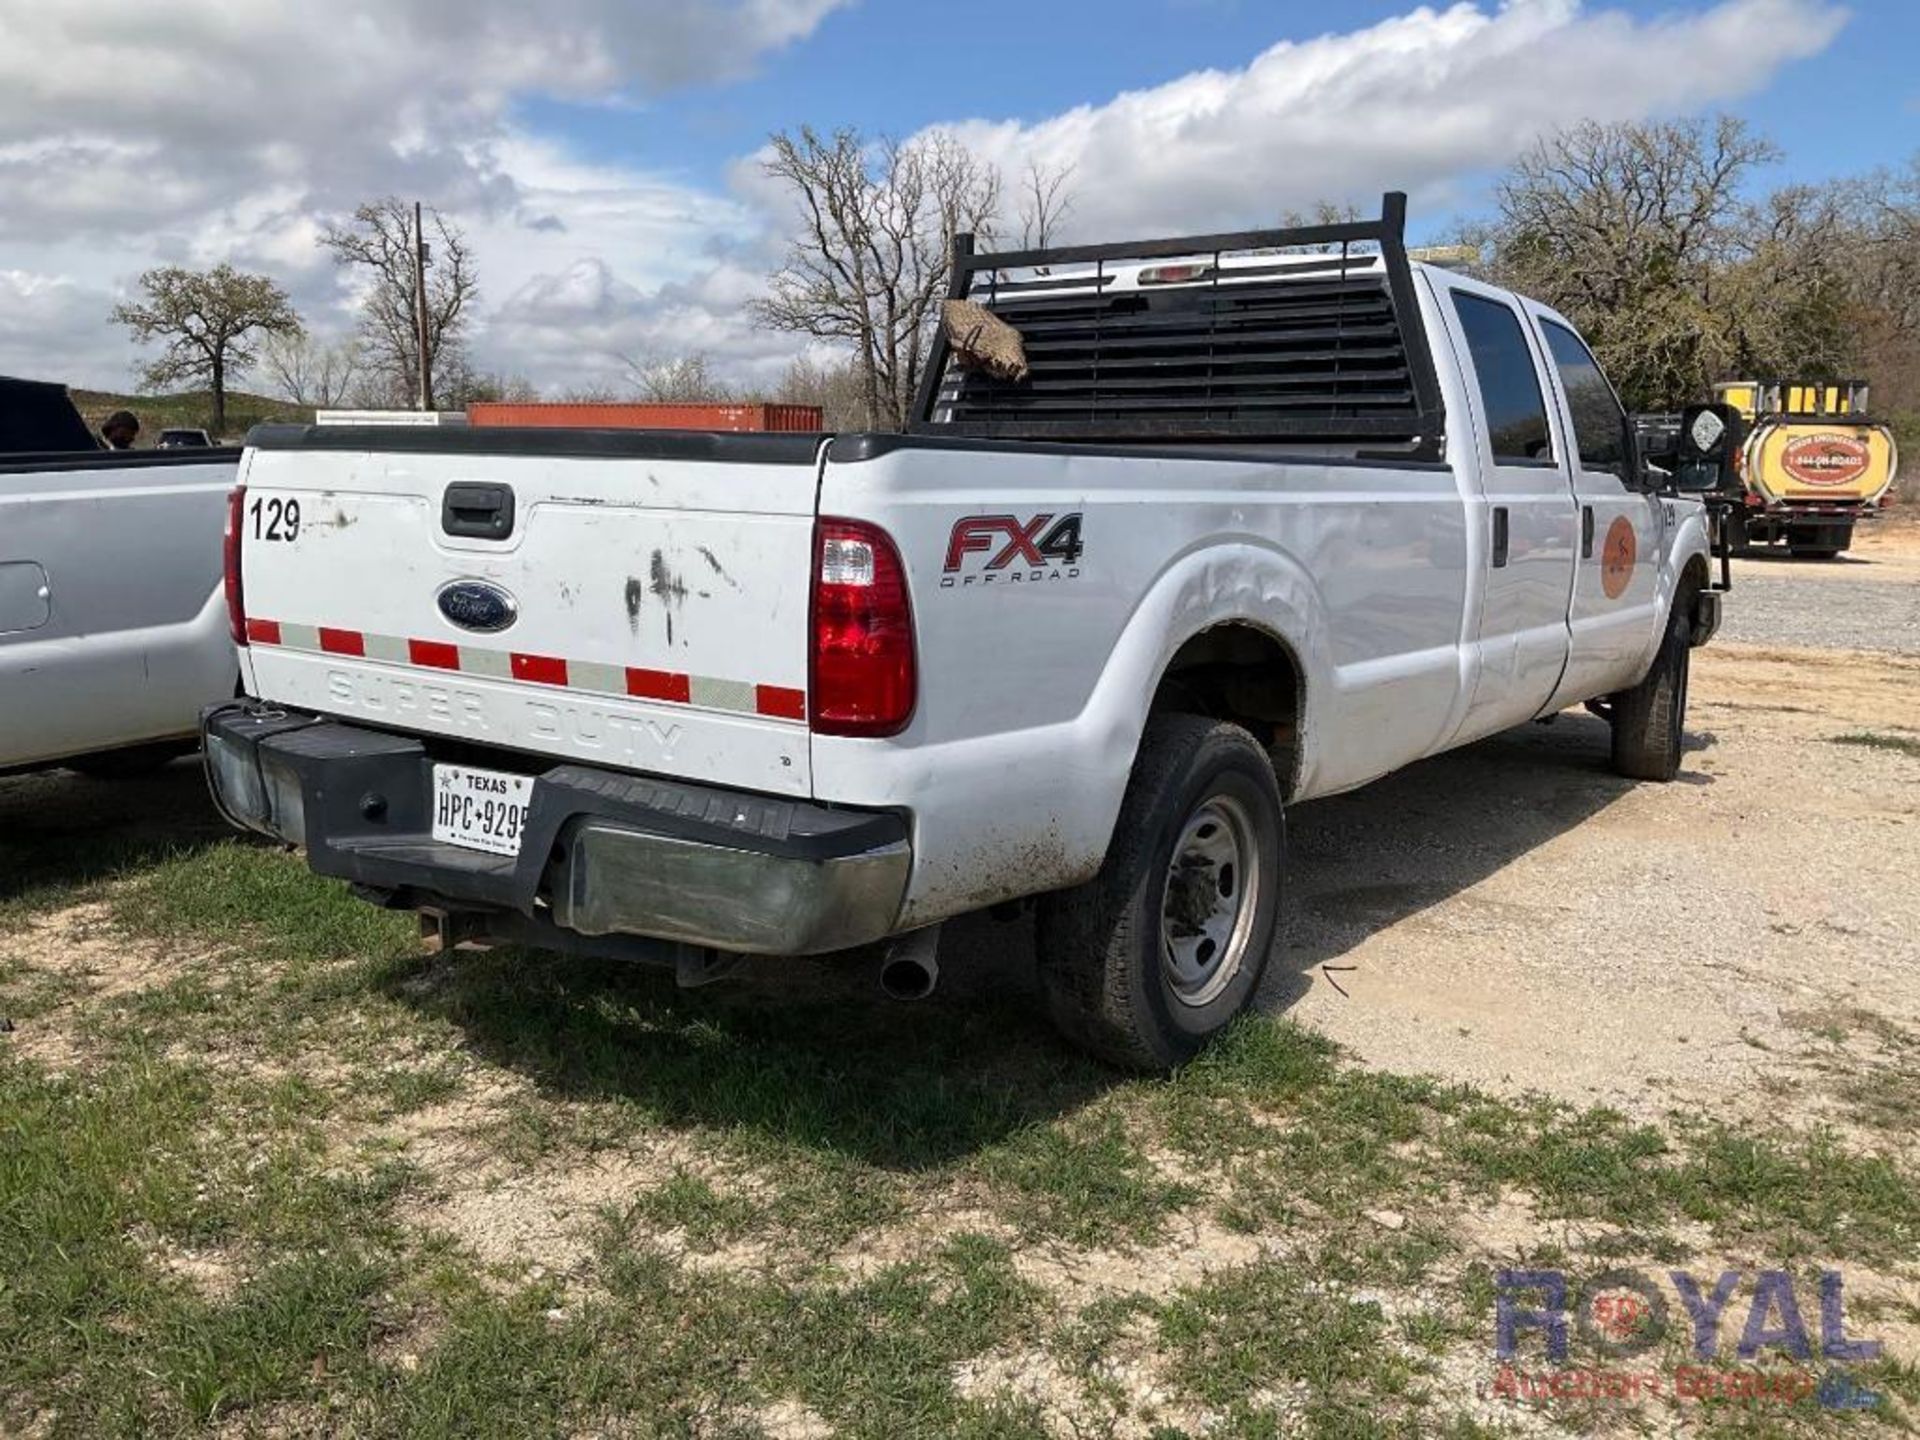 2016 Ford F-250 4x4 Crew Cab Pickup Truck - Image 3 of 24